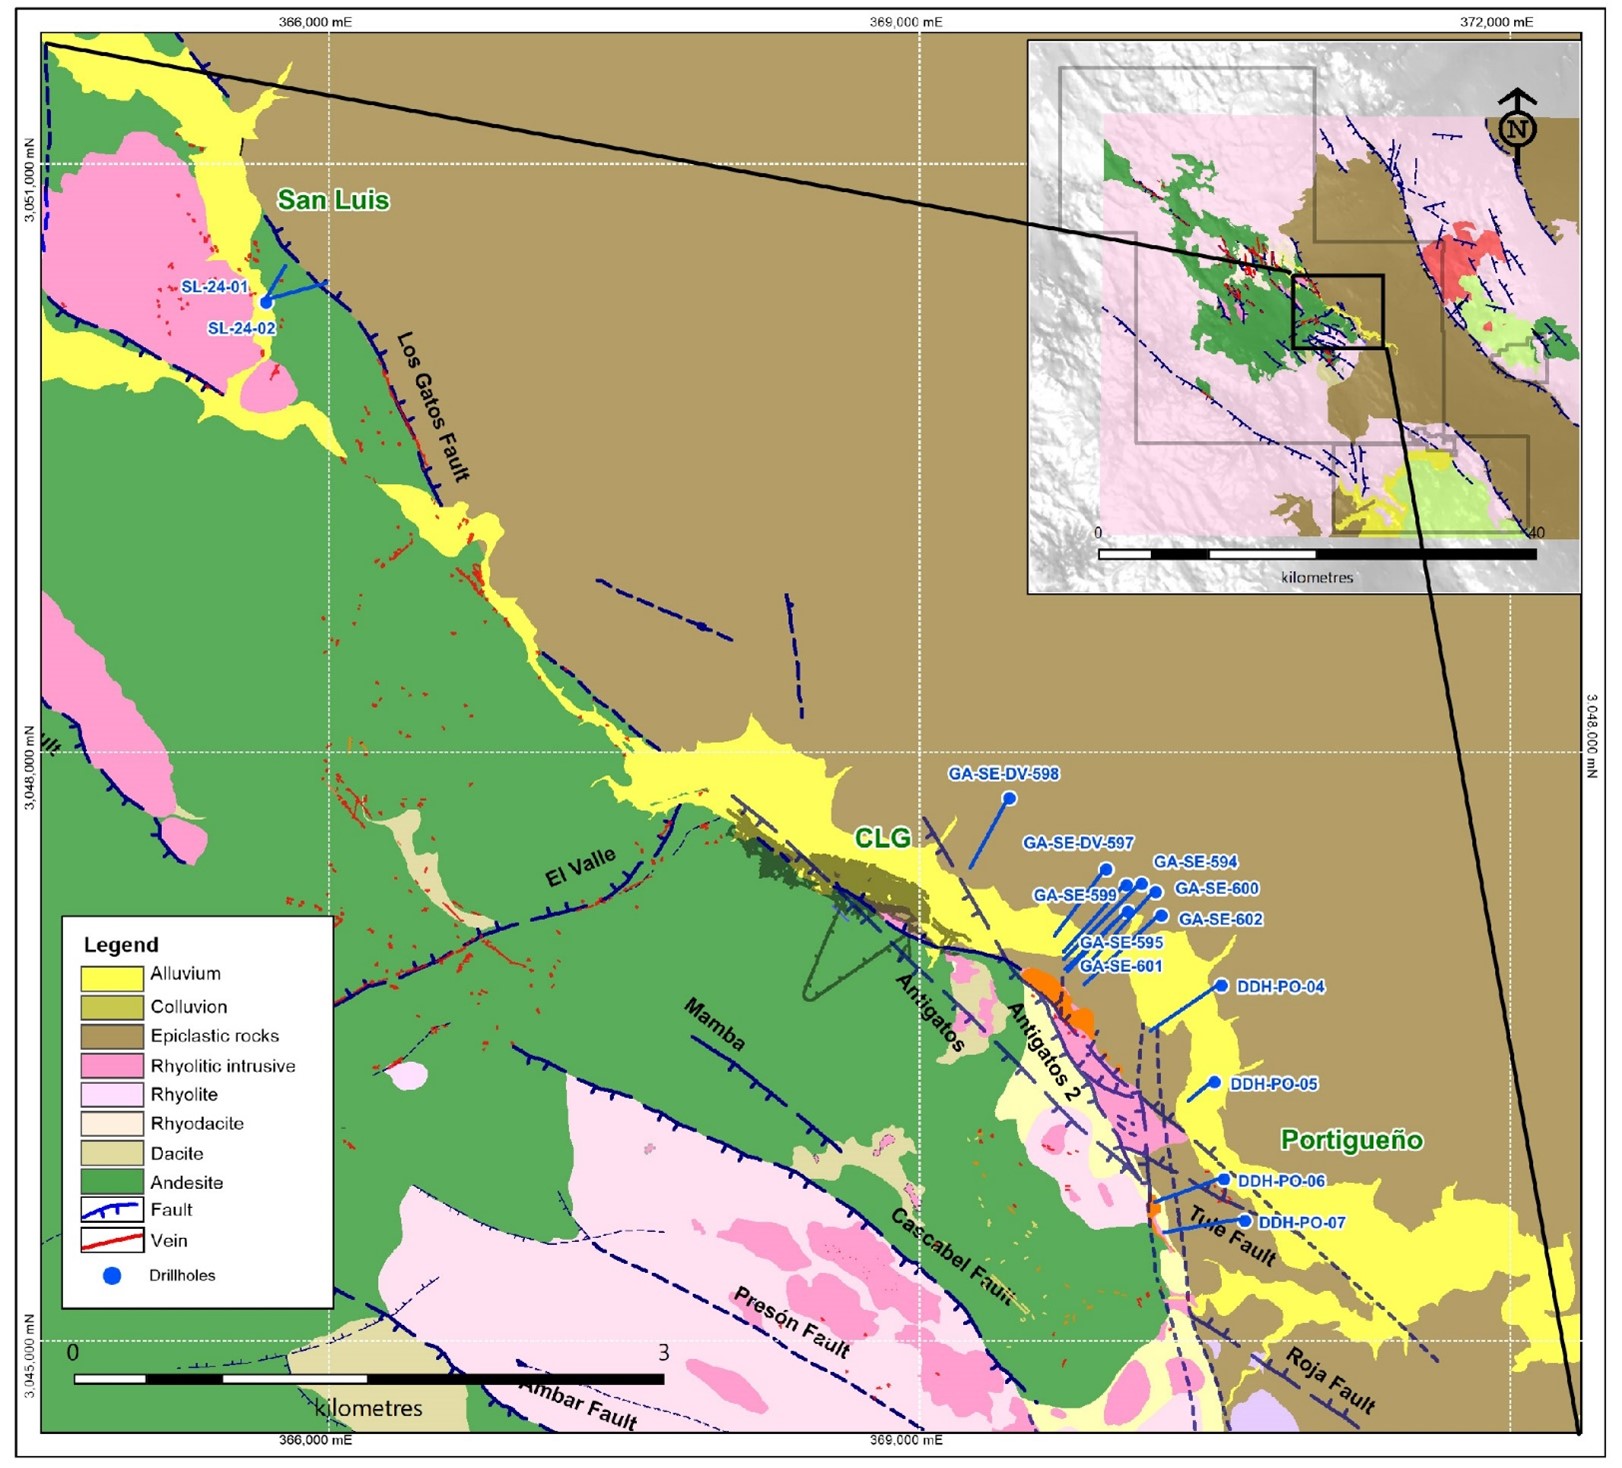 Plan view of near-mine prospects, select high-priority drill targets and drillholes in SE Deeps, Portigueño and San Luis Targets